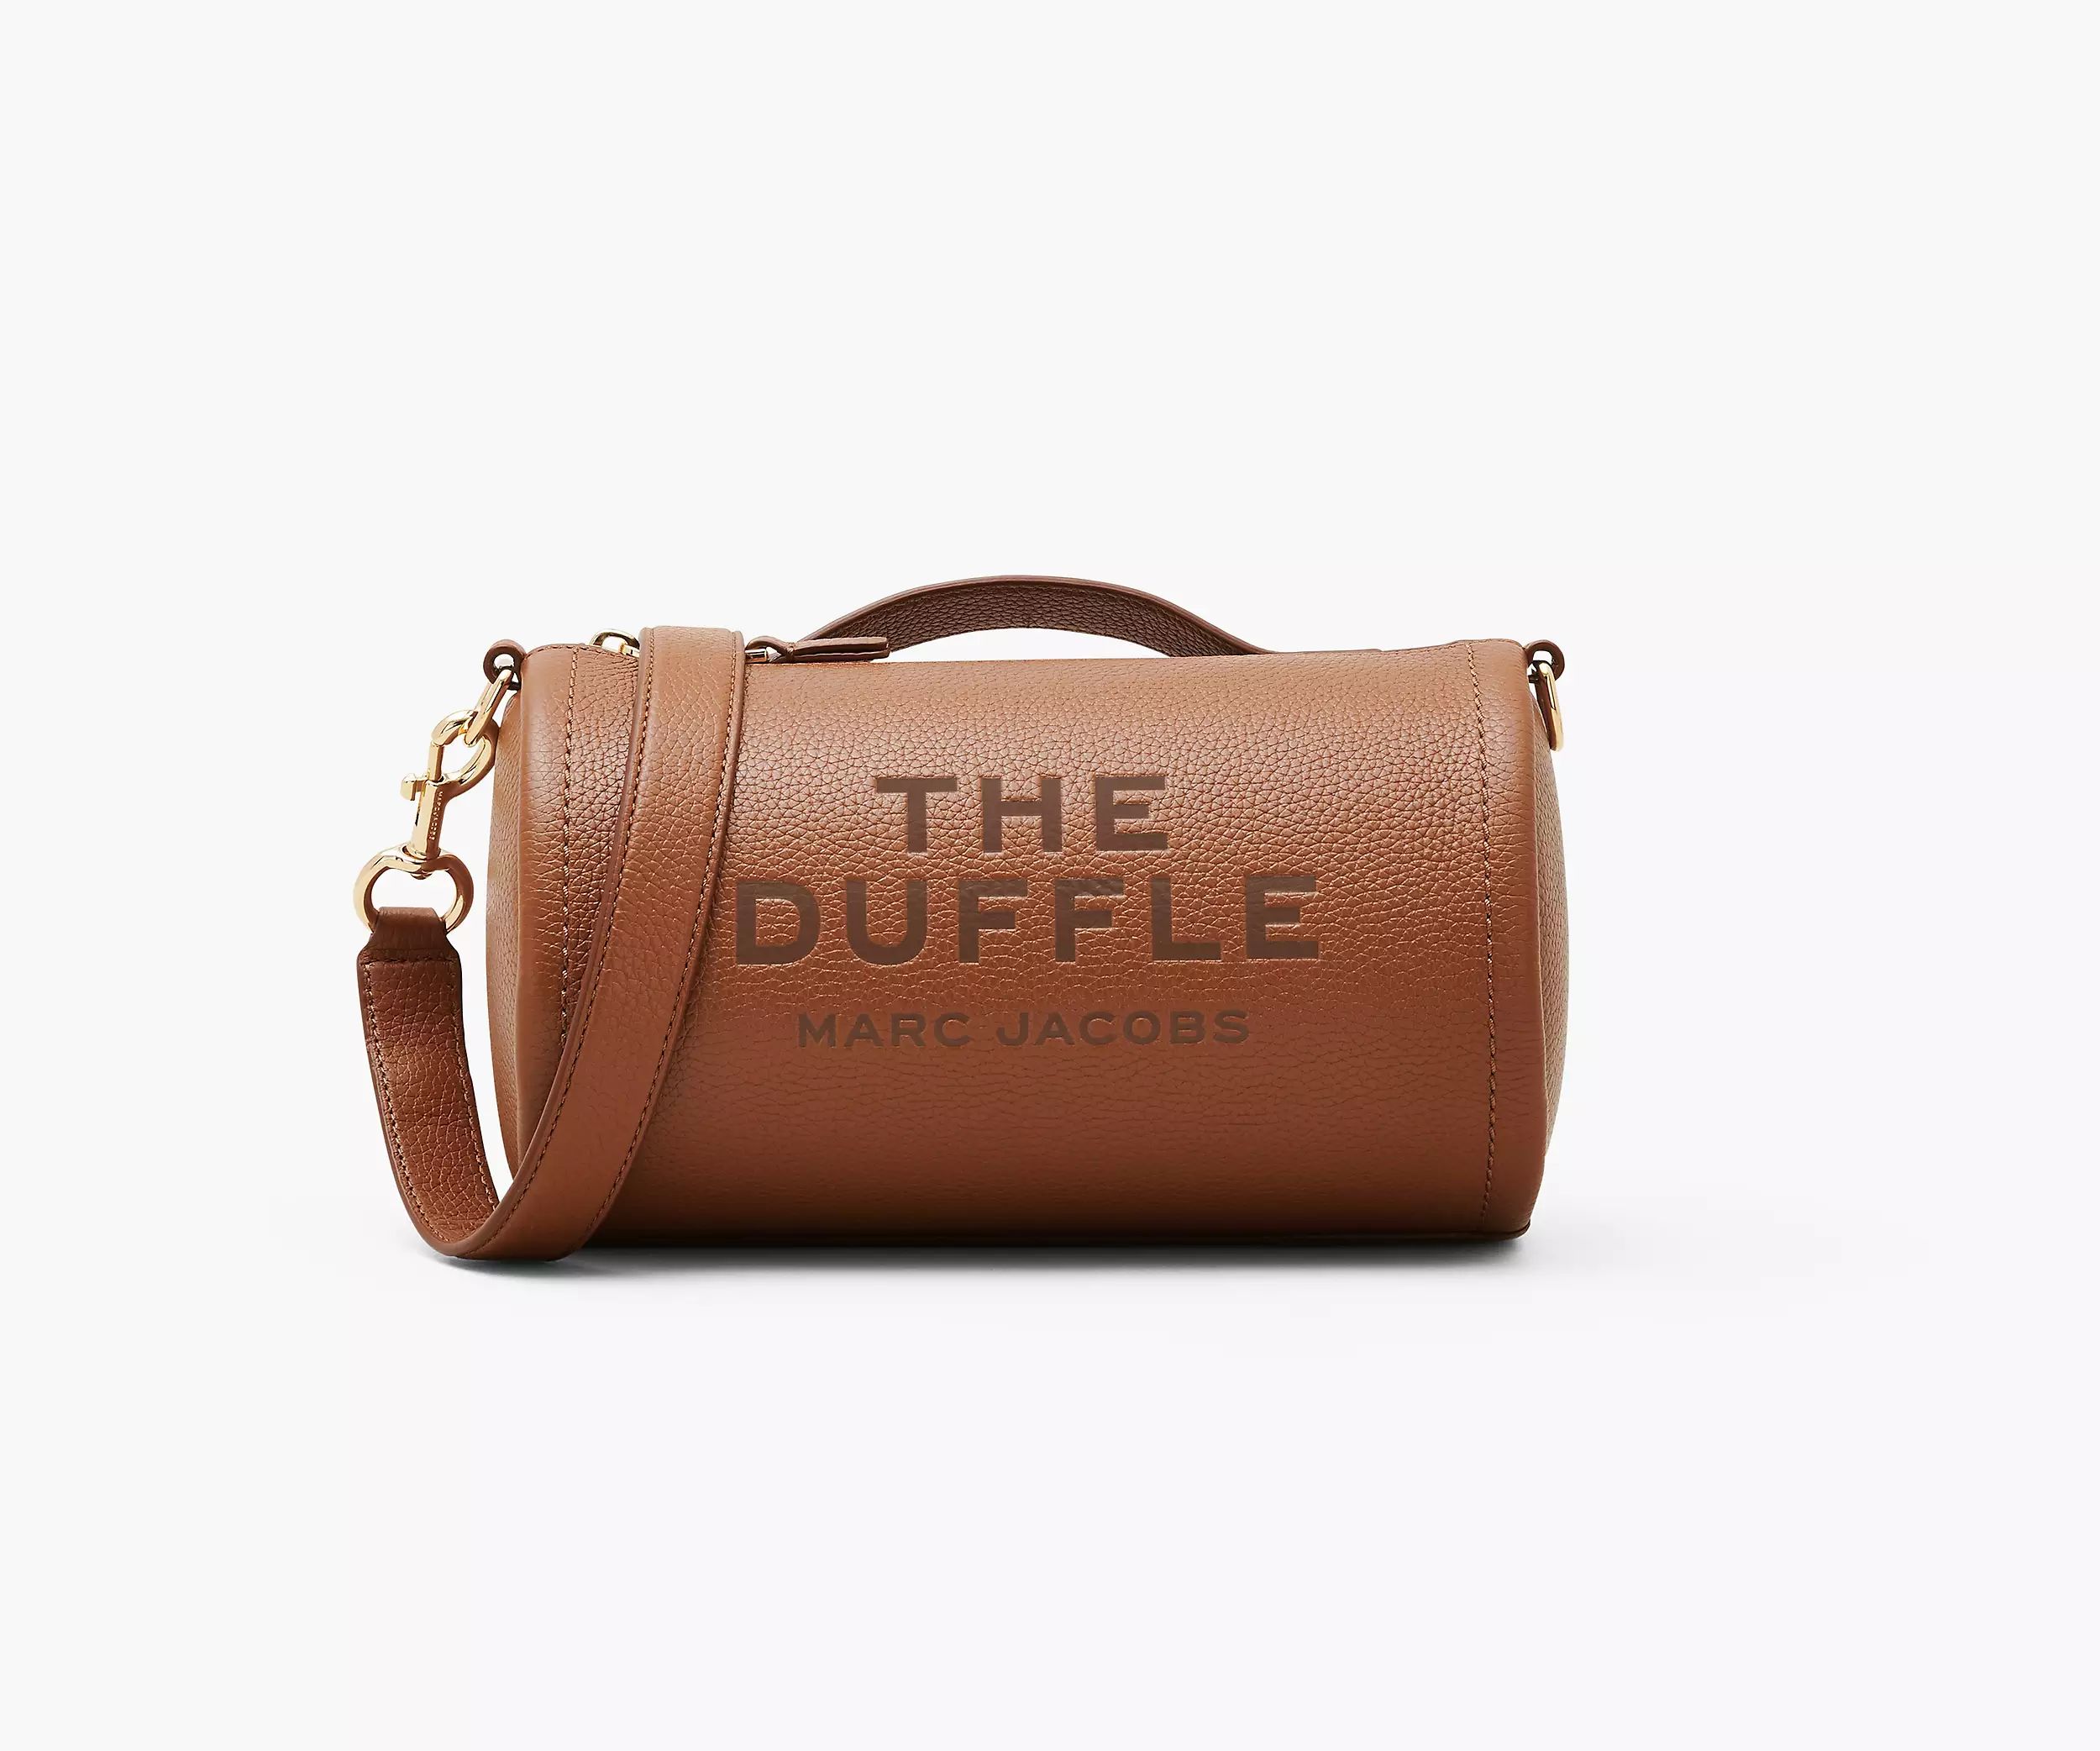 The Leather Duffle Bag | Marc Jacobs